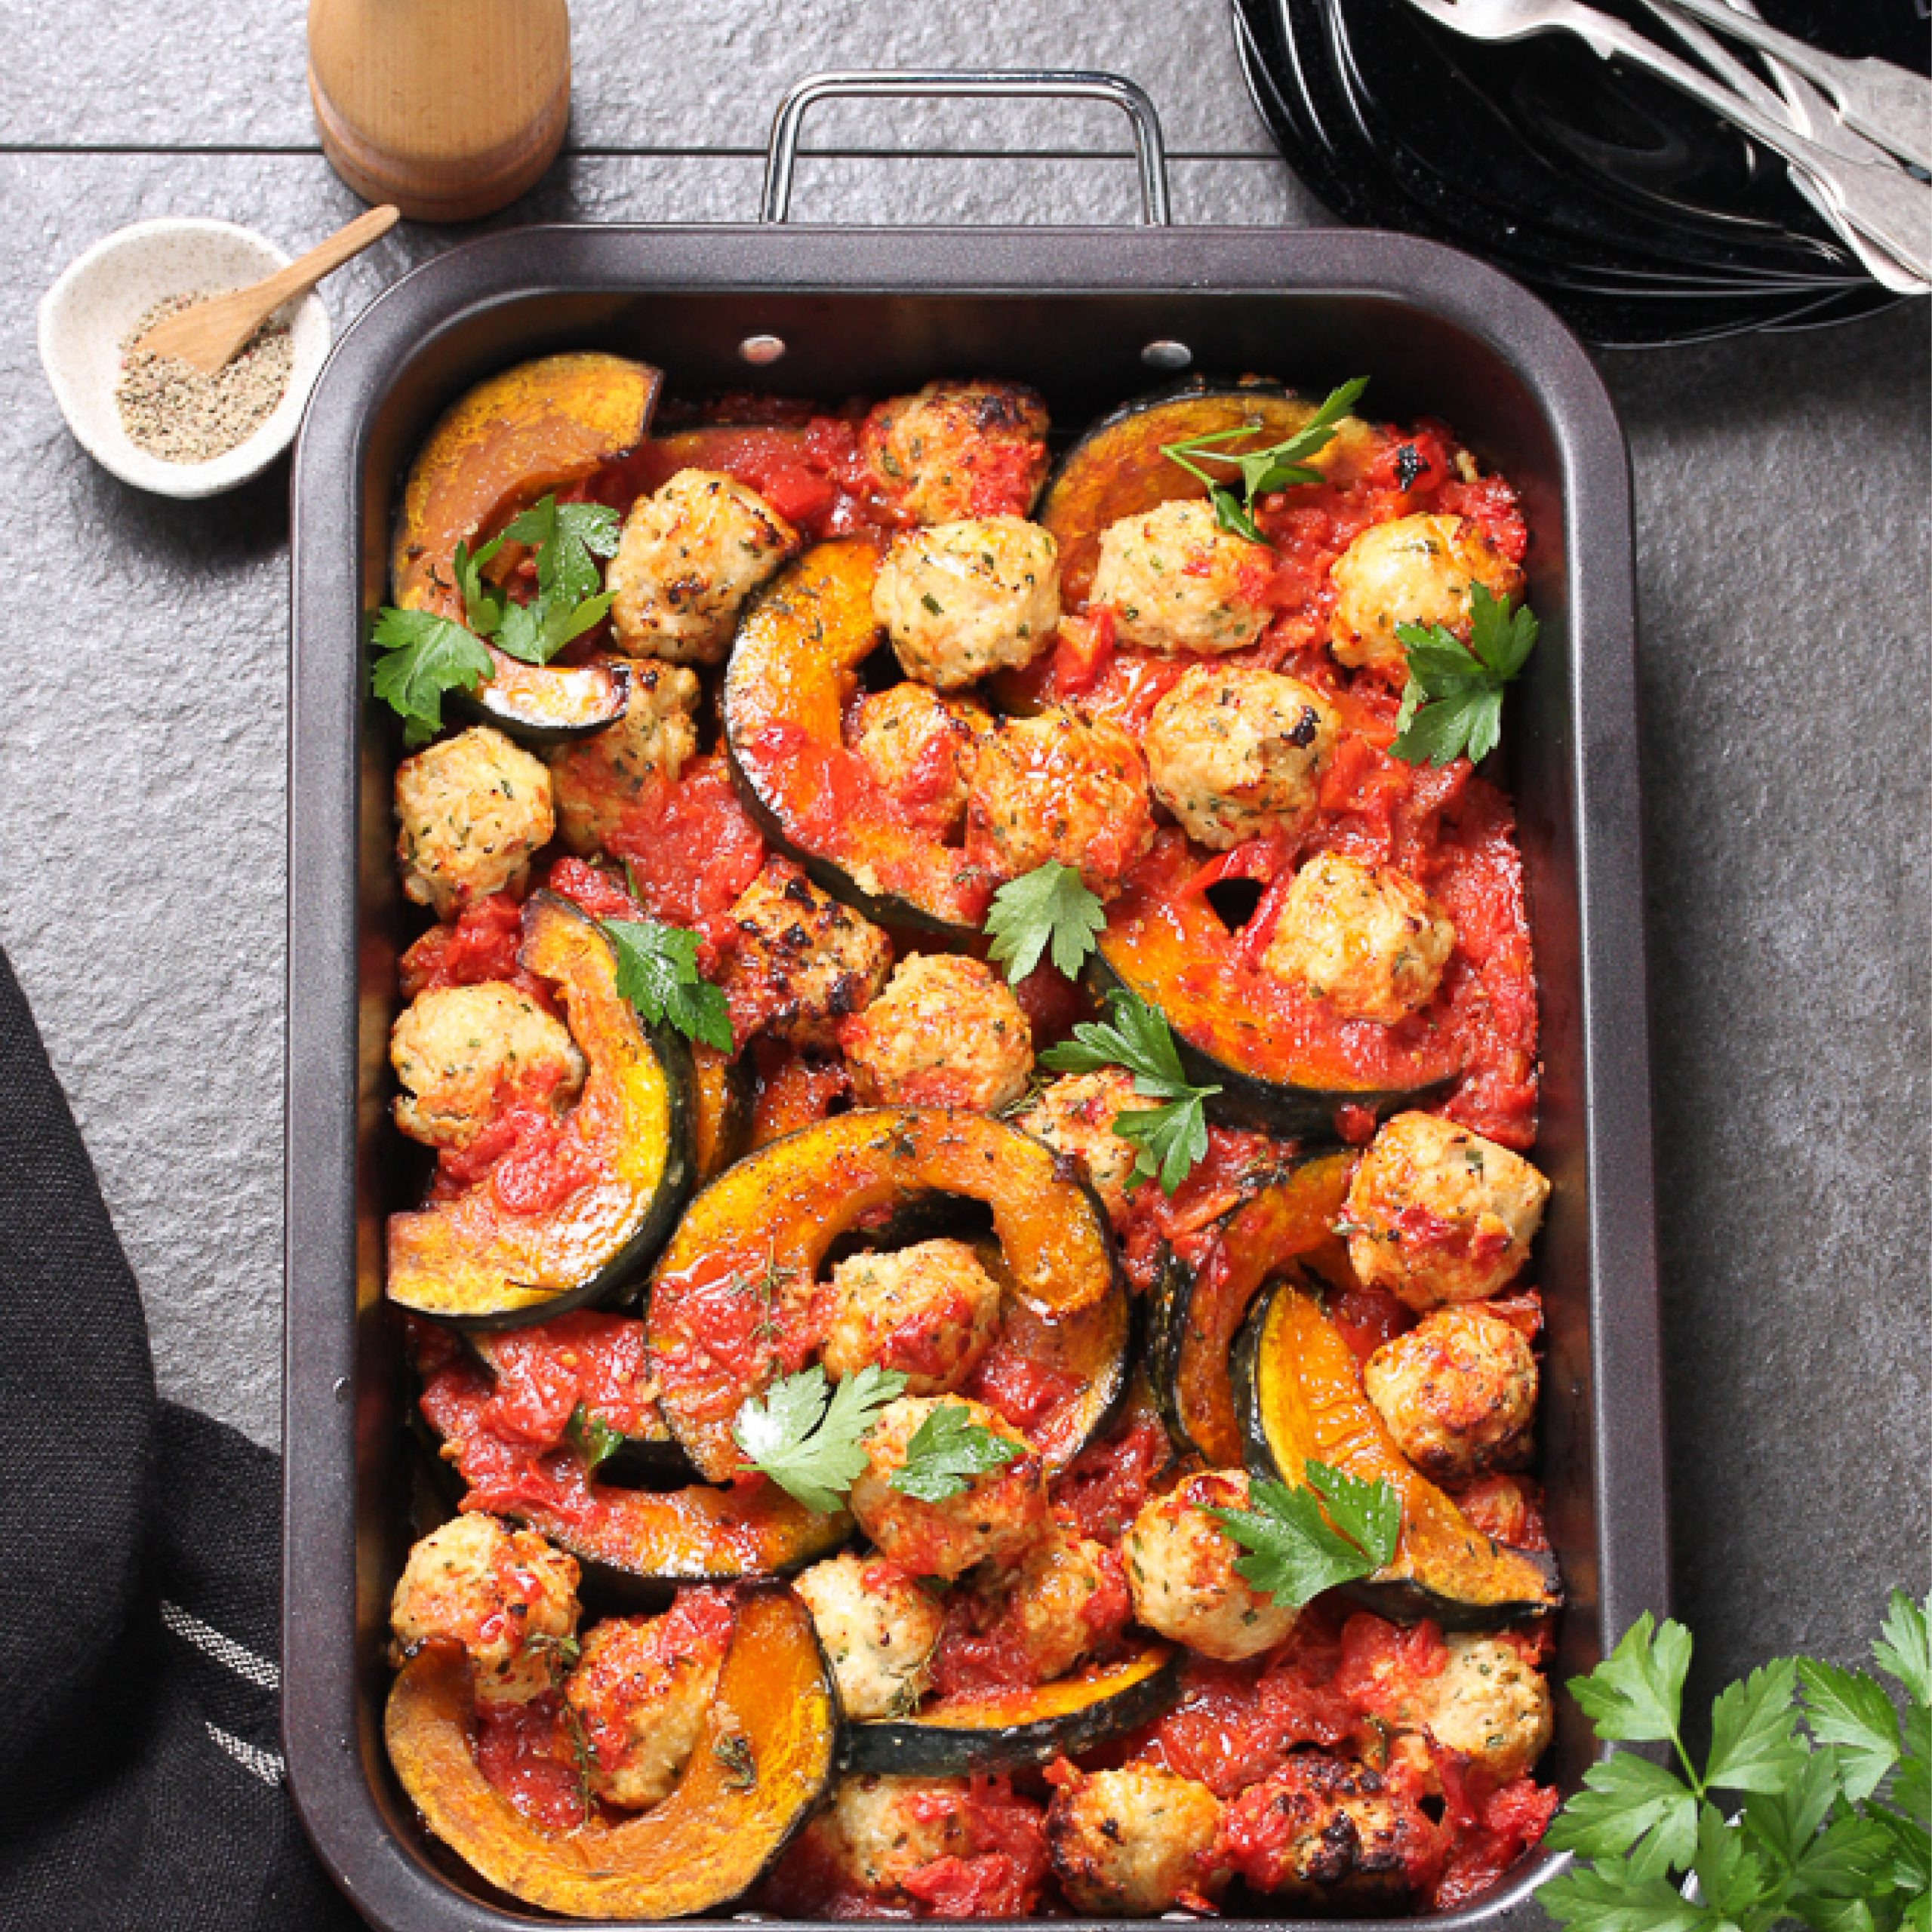 LeaderBrand Chicken & Herb Meatballs with Squash Recipe